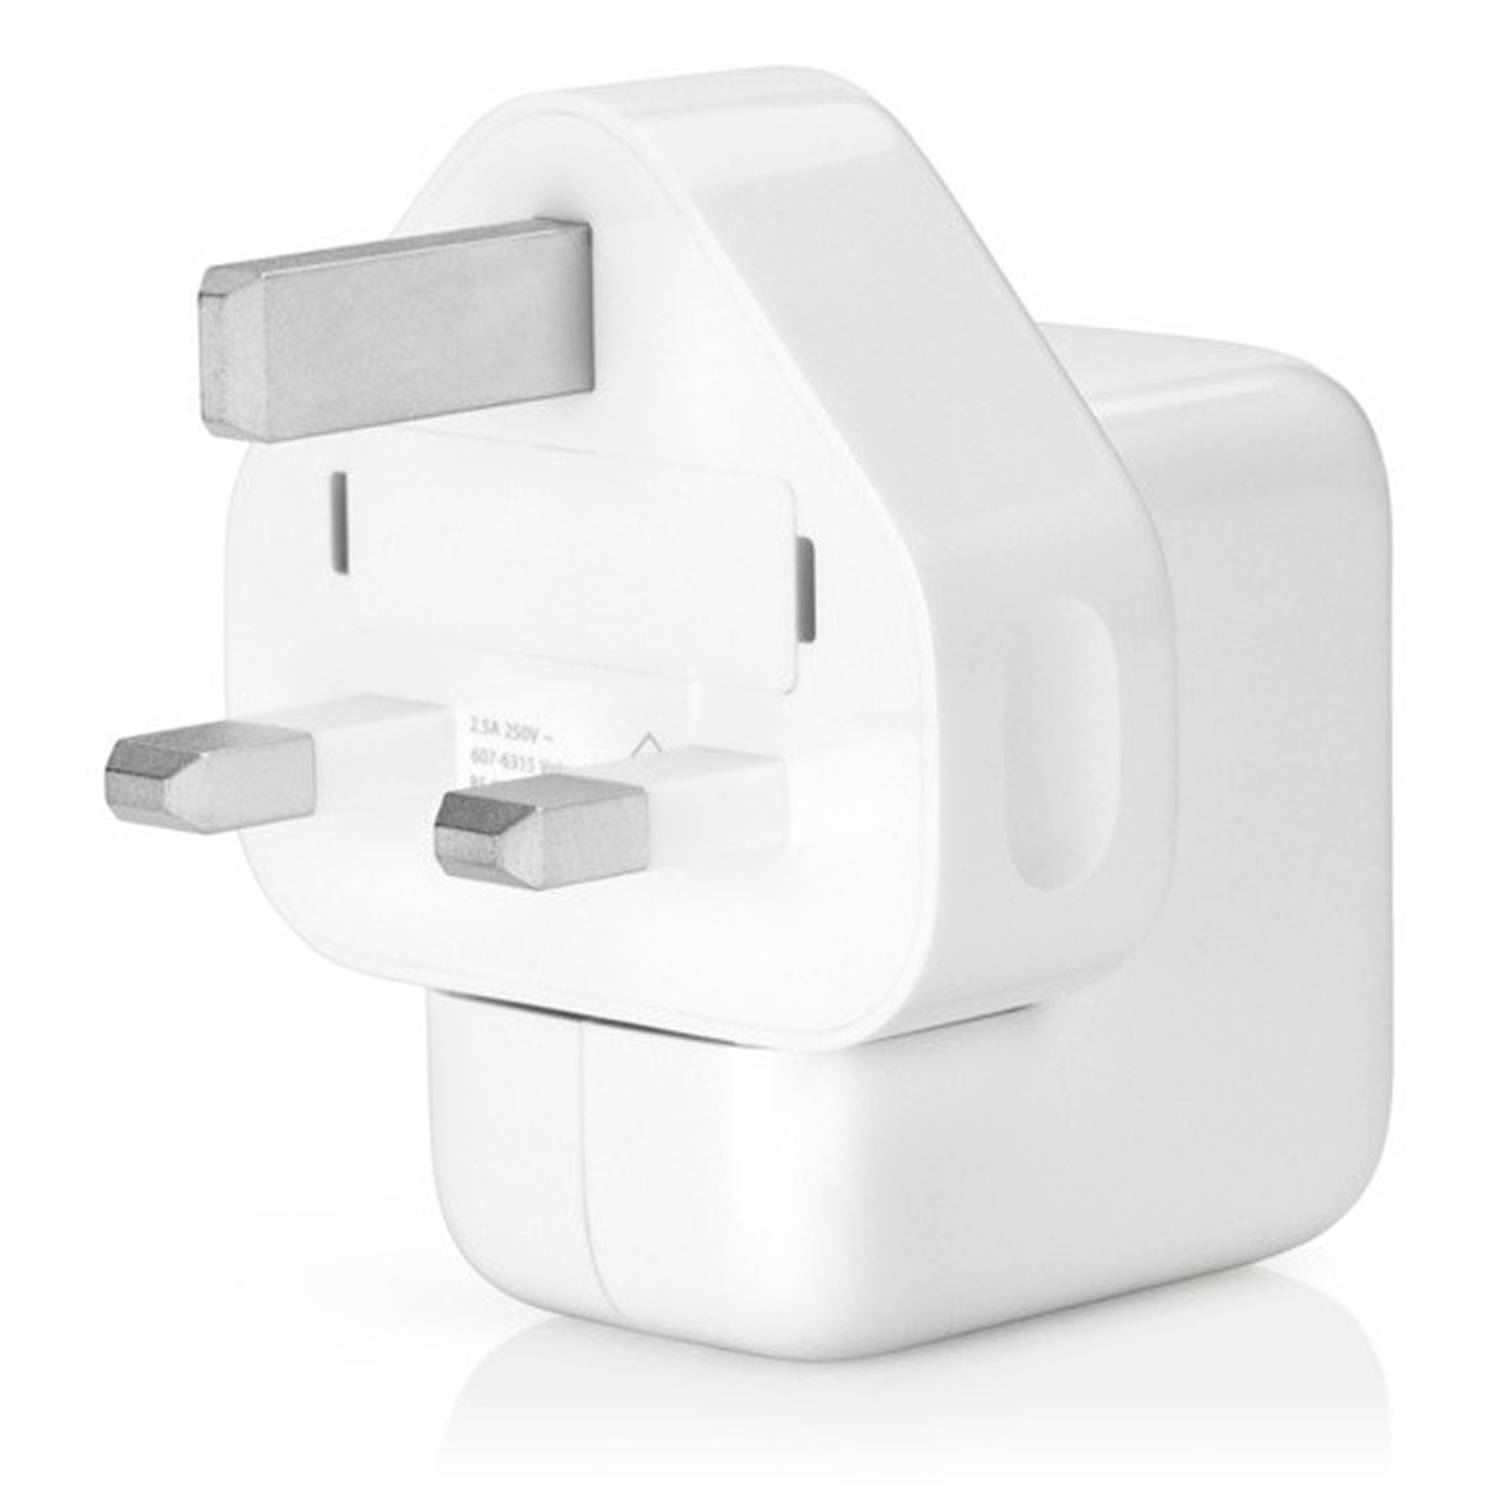 12W Apple 3-Pin Power Adapter for iPhone, iPad & Apple Watch